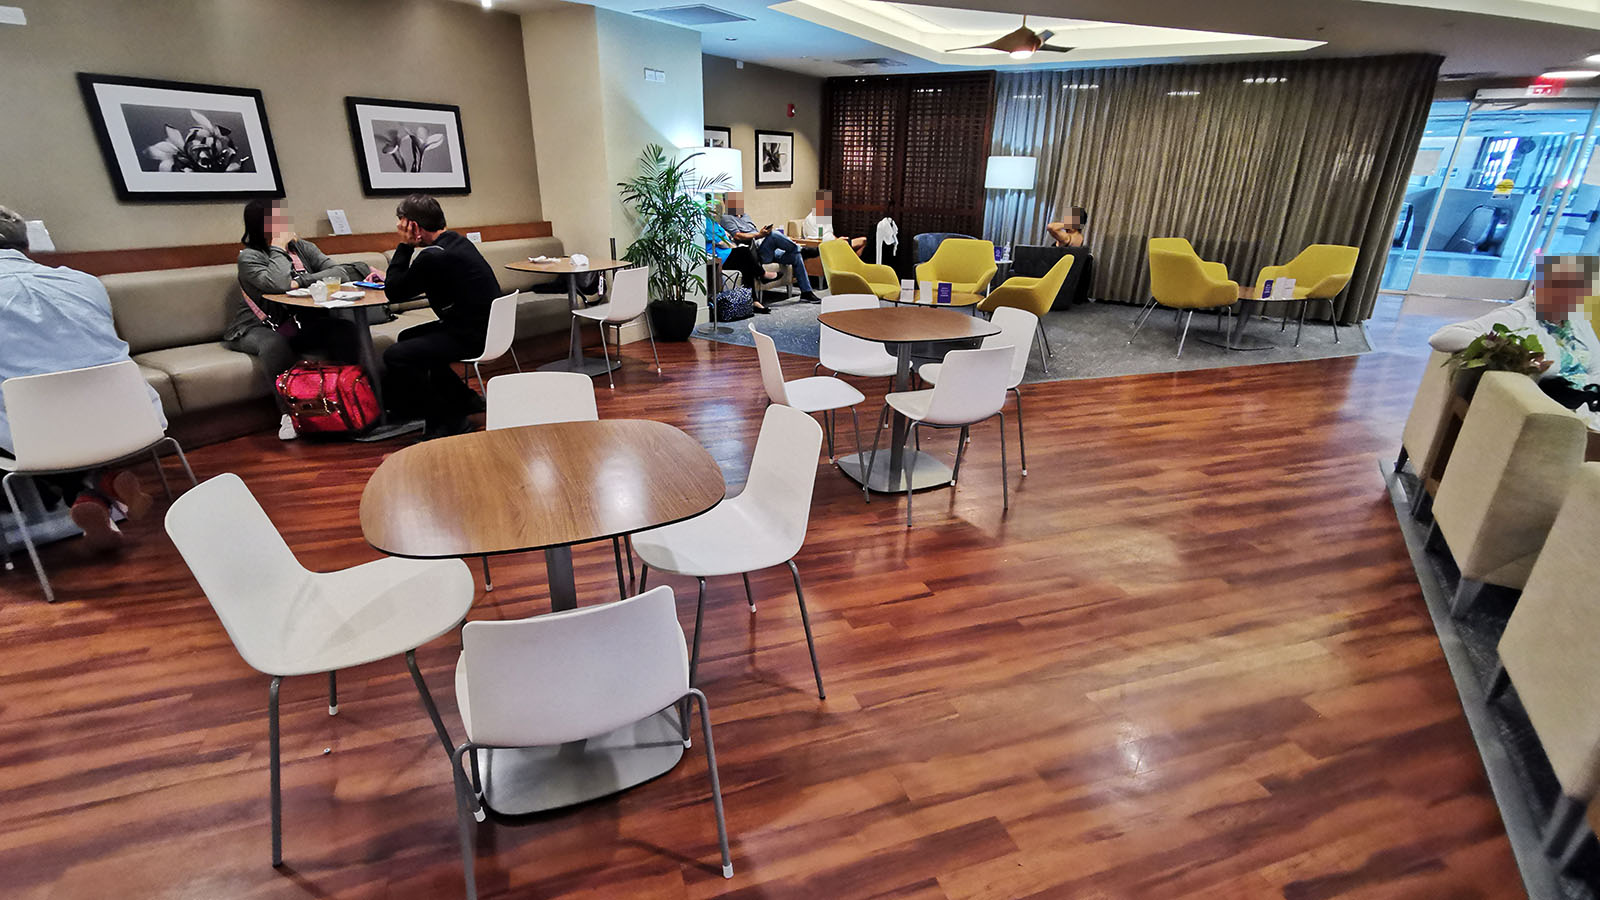 Seating at a Priority Pass lounge in Honolulu